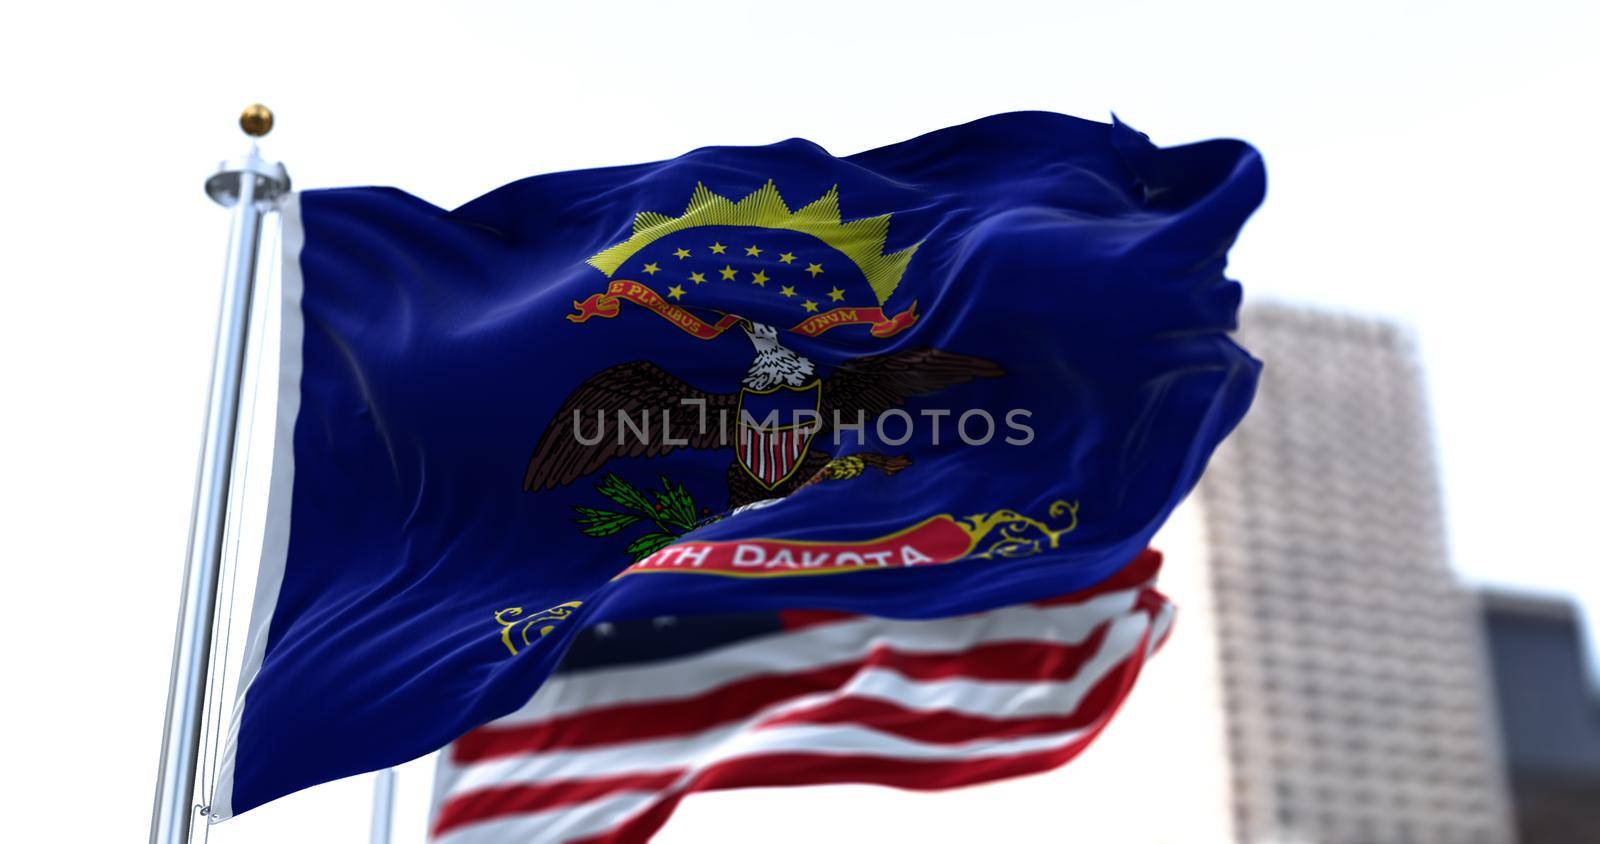 the flag of the US state of North Dakota waving in the wind with the American stars and stripes flag blurred in the background. North Dakota was it admitted in 1889 as the 39th of the Union. Independence and unity